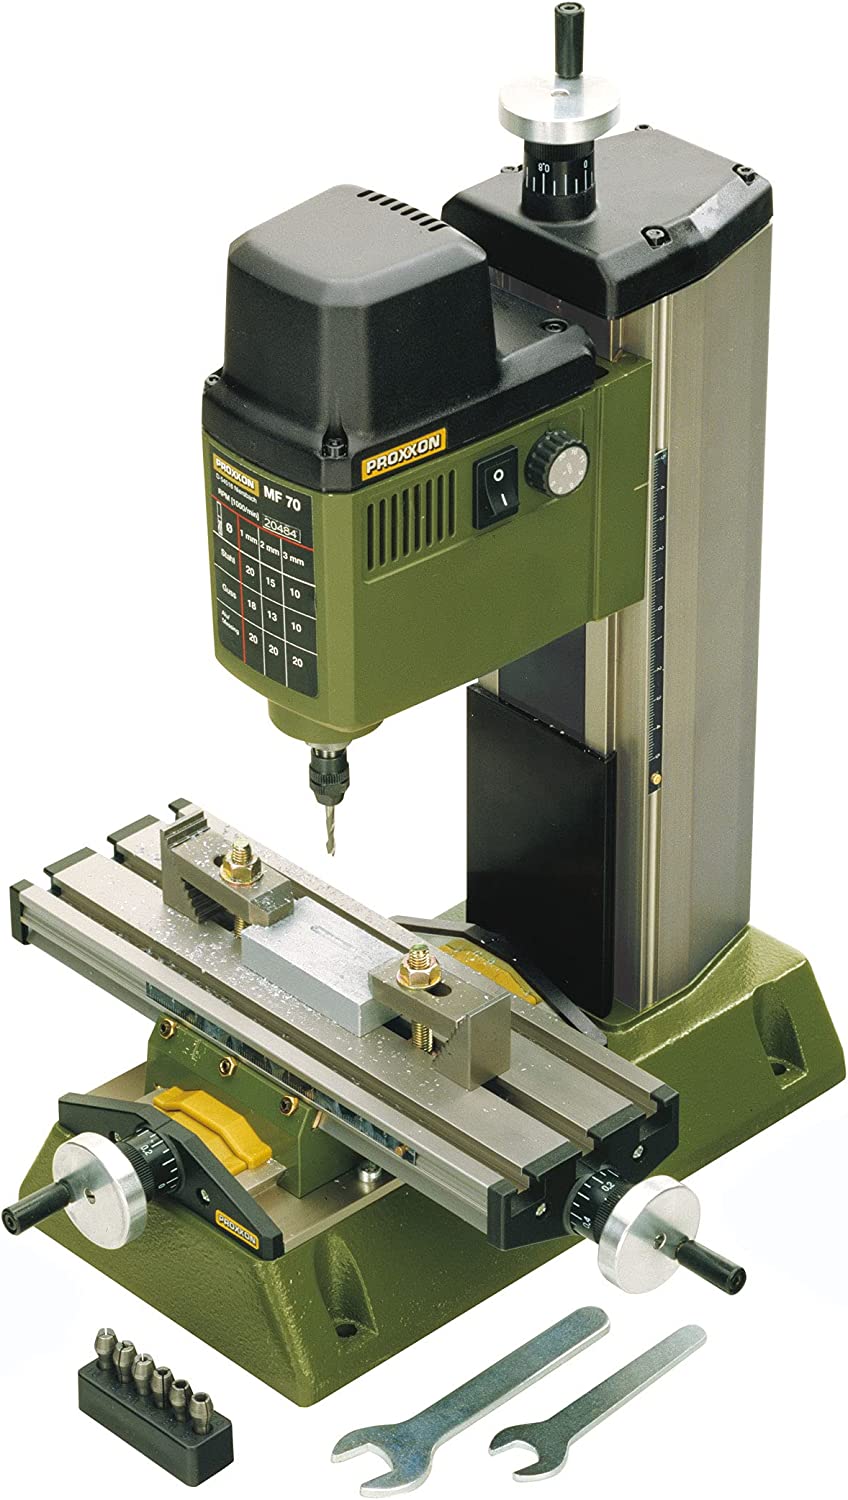 The Best Mini/Benchtop Milling Machine in 2022